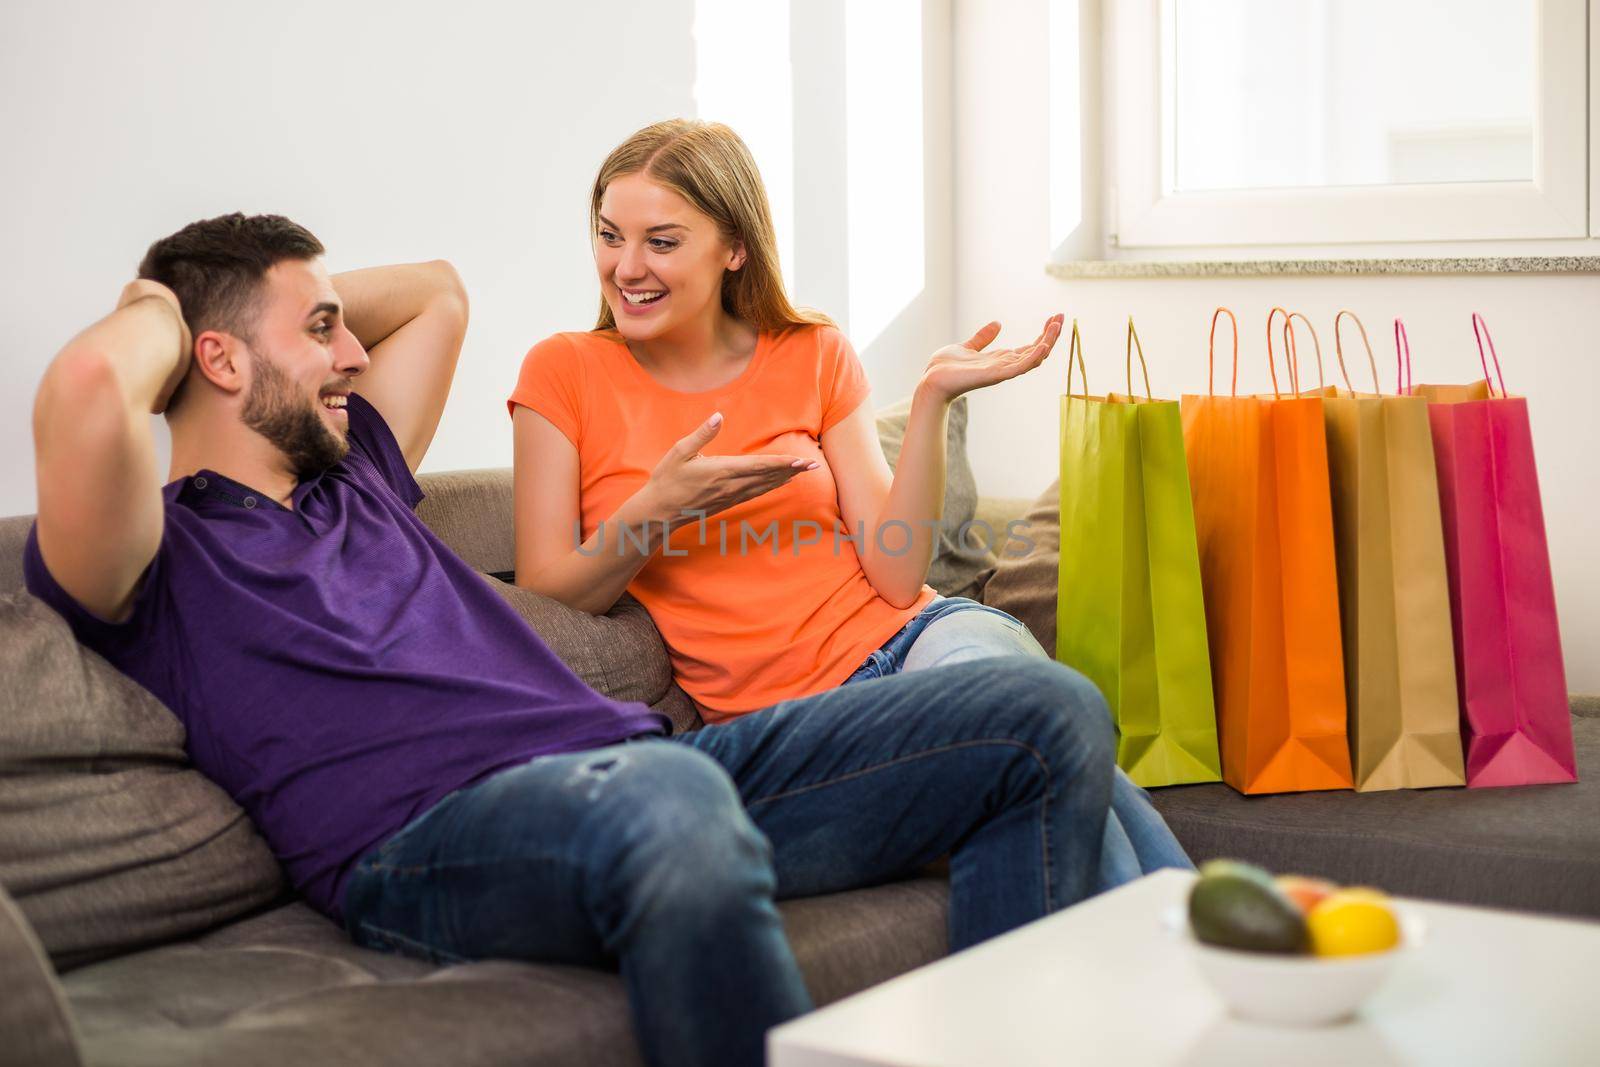 Wife is showing to her husband shopping bags while they sitting at their home.